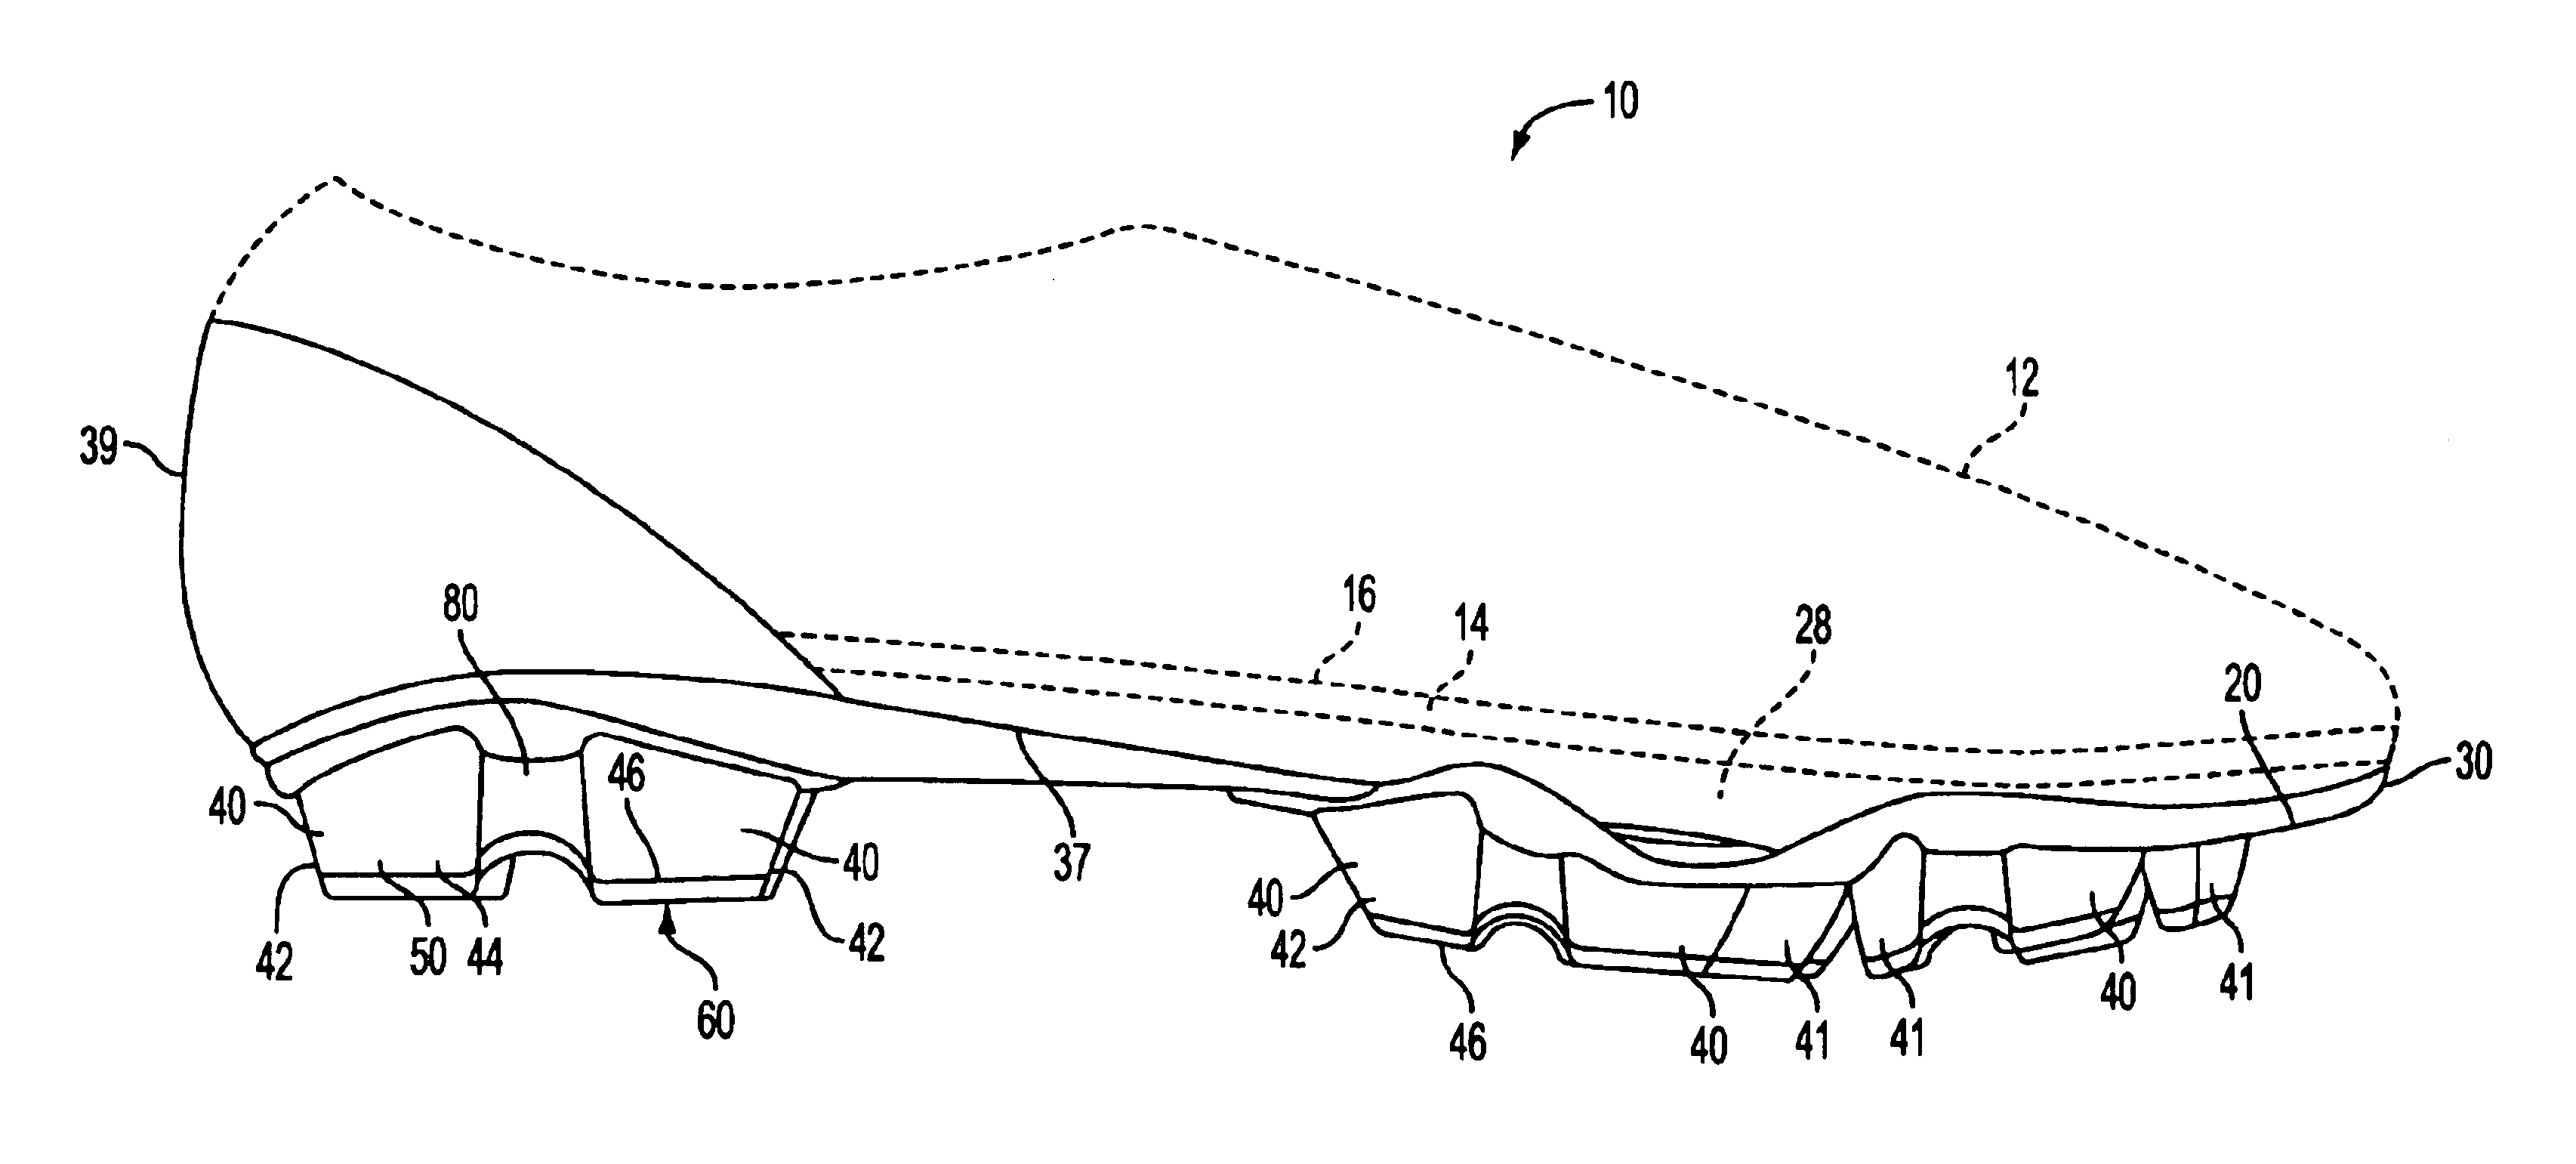 Article of cleated footwear having medial and lateral sides with differing properties